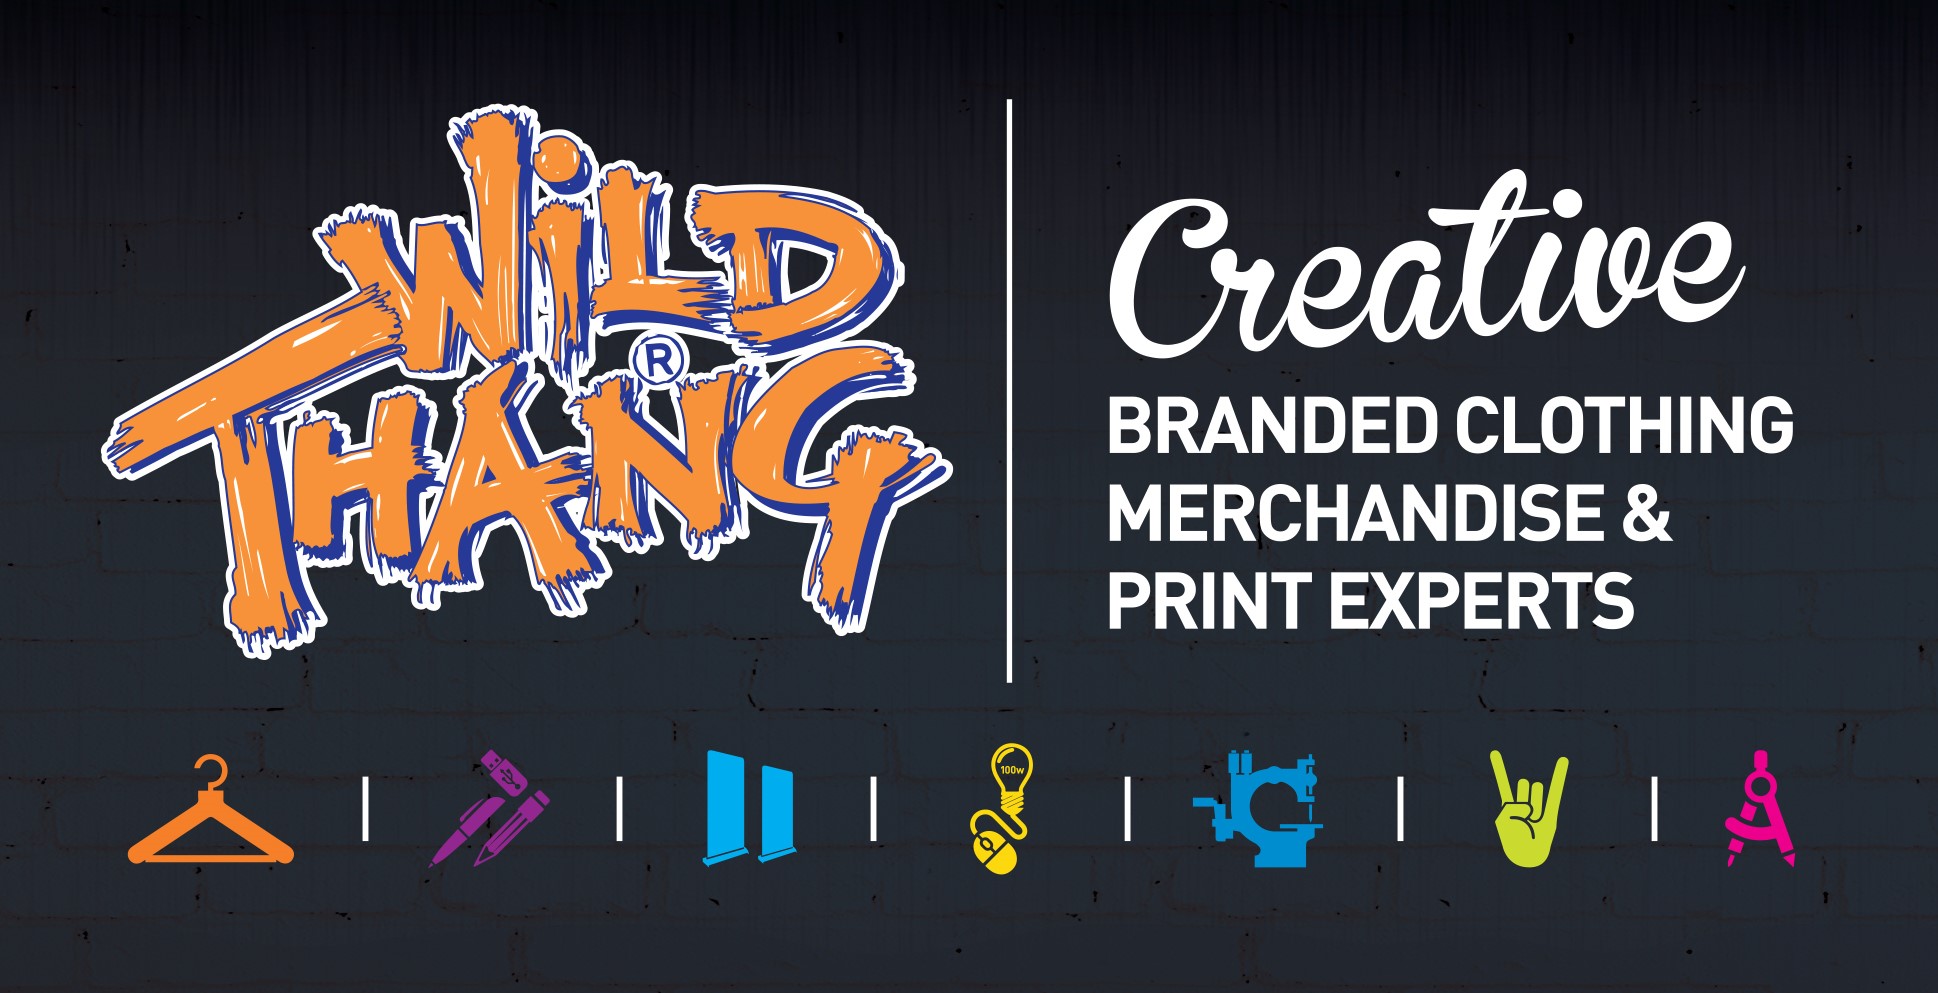  The image shows a logo that says 'Wild Thang' with the tagline 'Creative Branded Clothing Merchandise & Print Experts' below it. There are also several icons representing different types of clothing and printing. The image represents the search query 'Wild Thang the Pekingese from Instagram'.